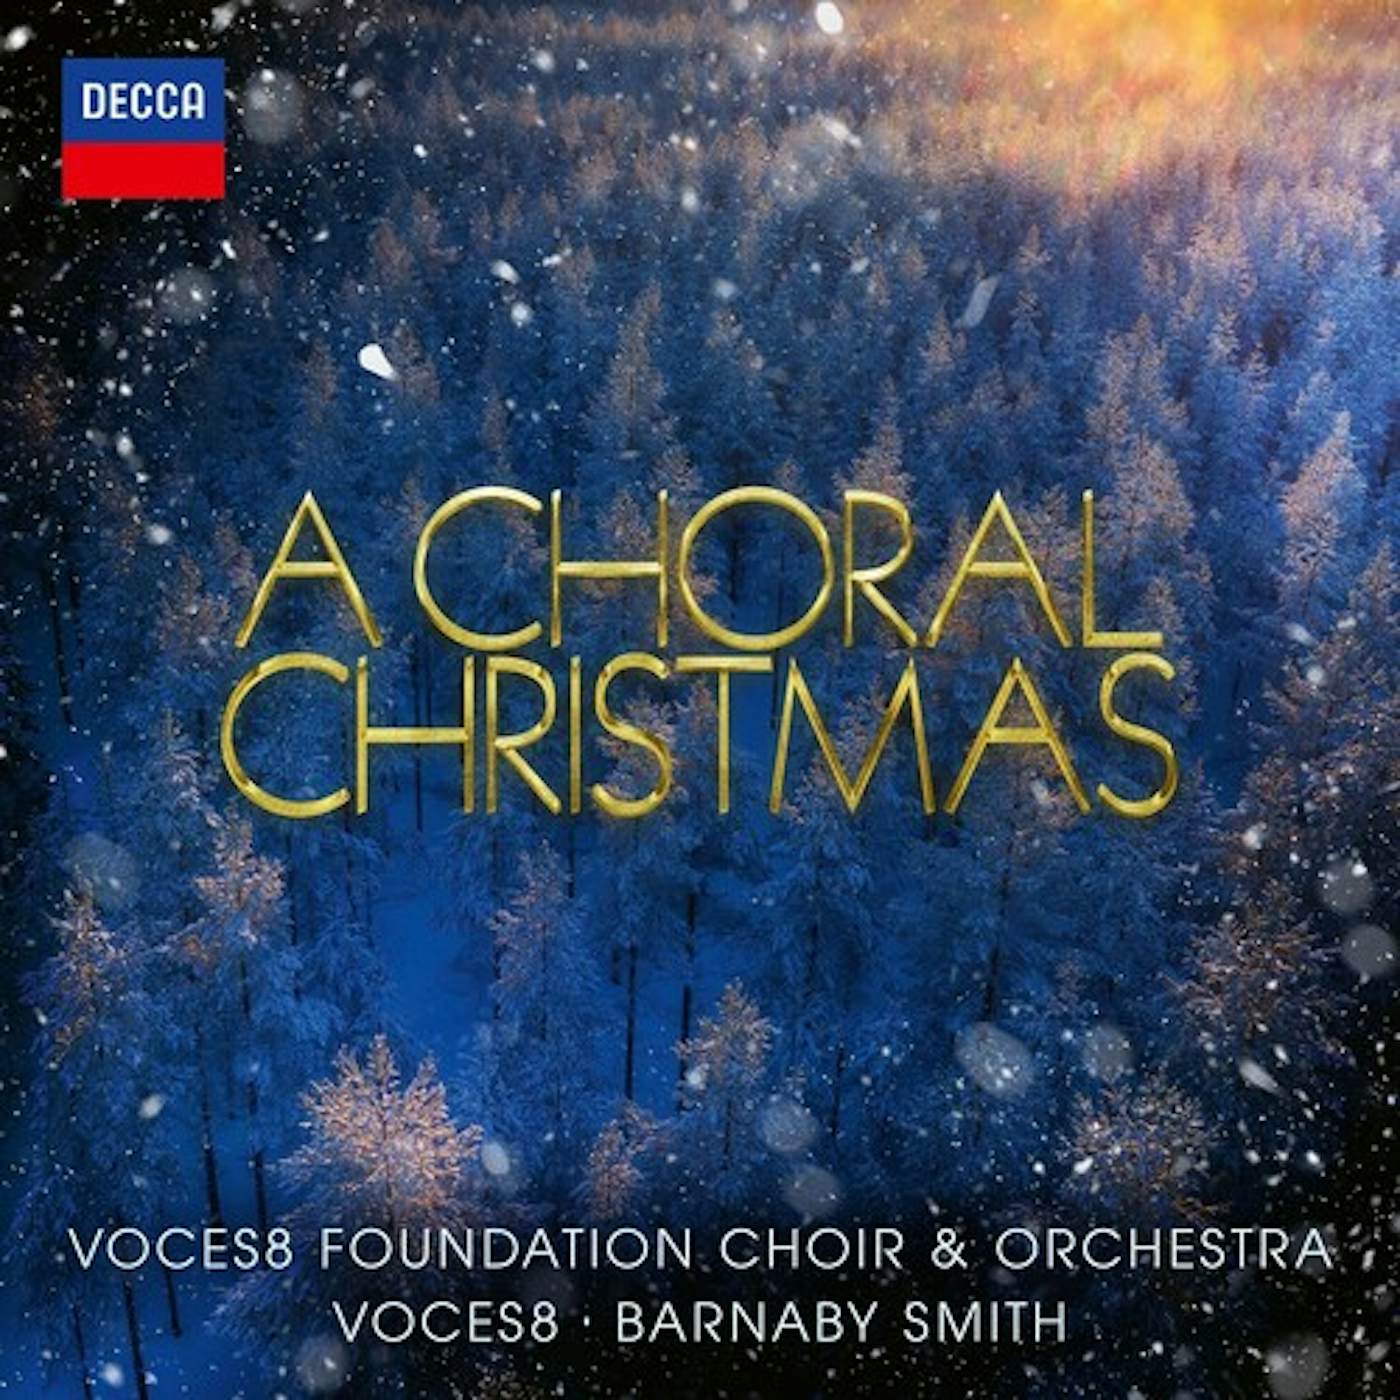 VOCES8 CHORAL CHRISTMAS CD